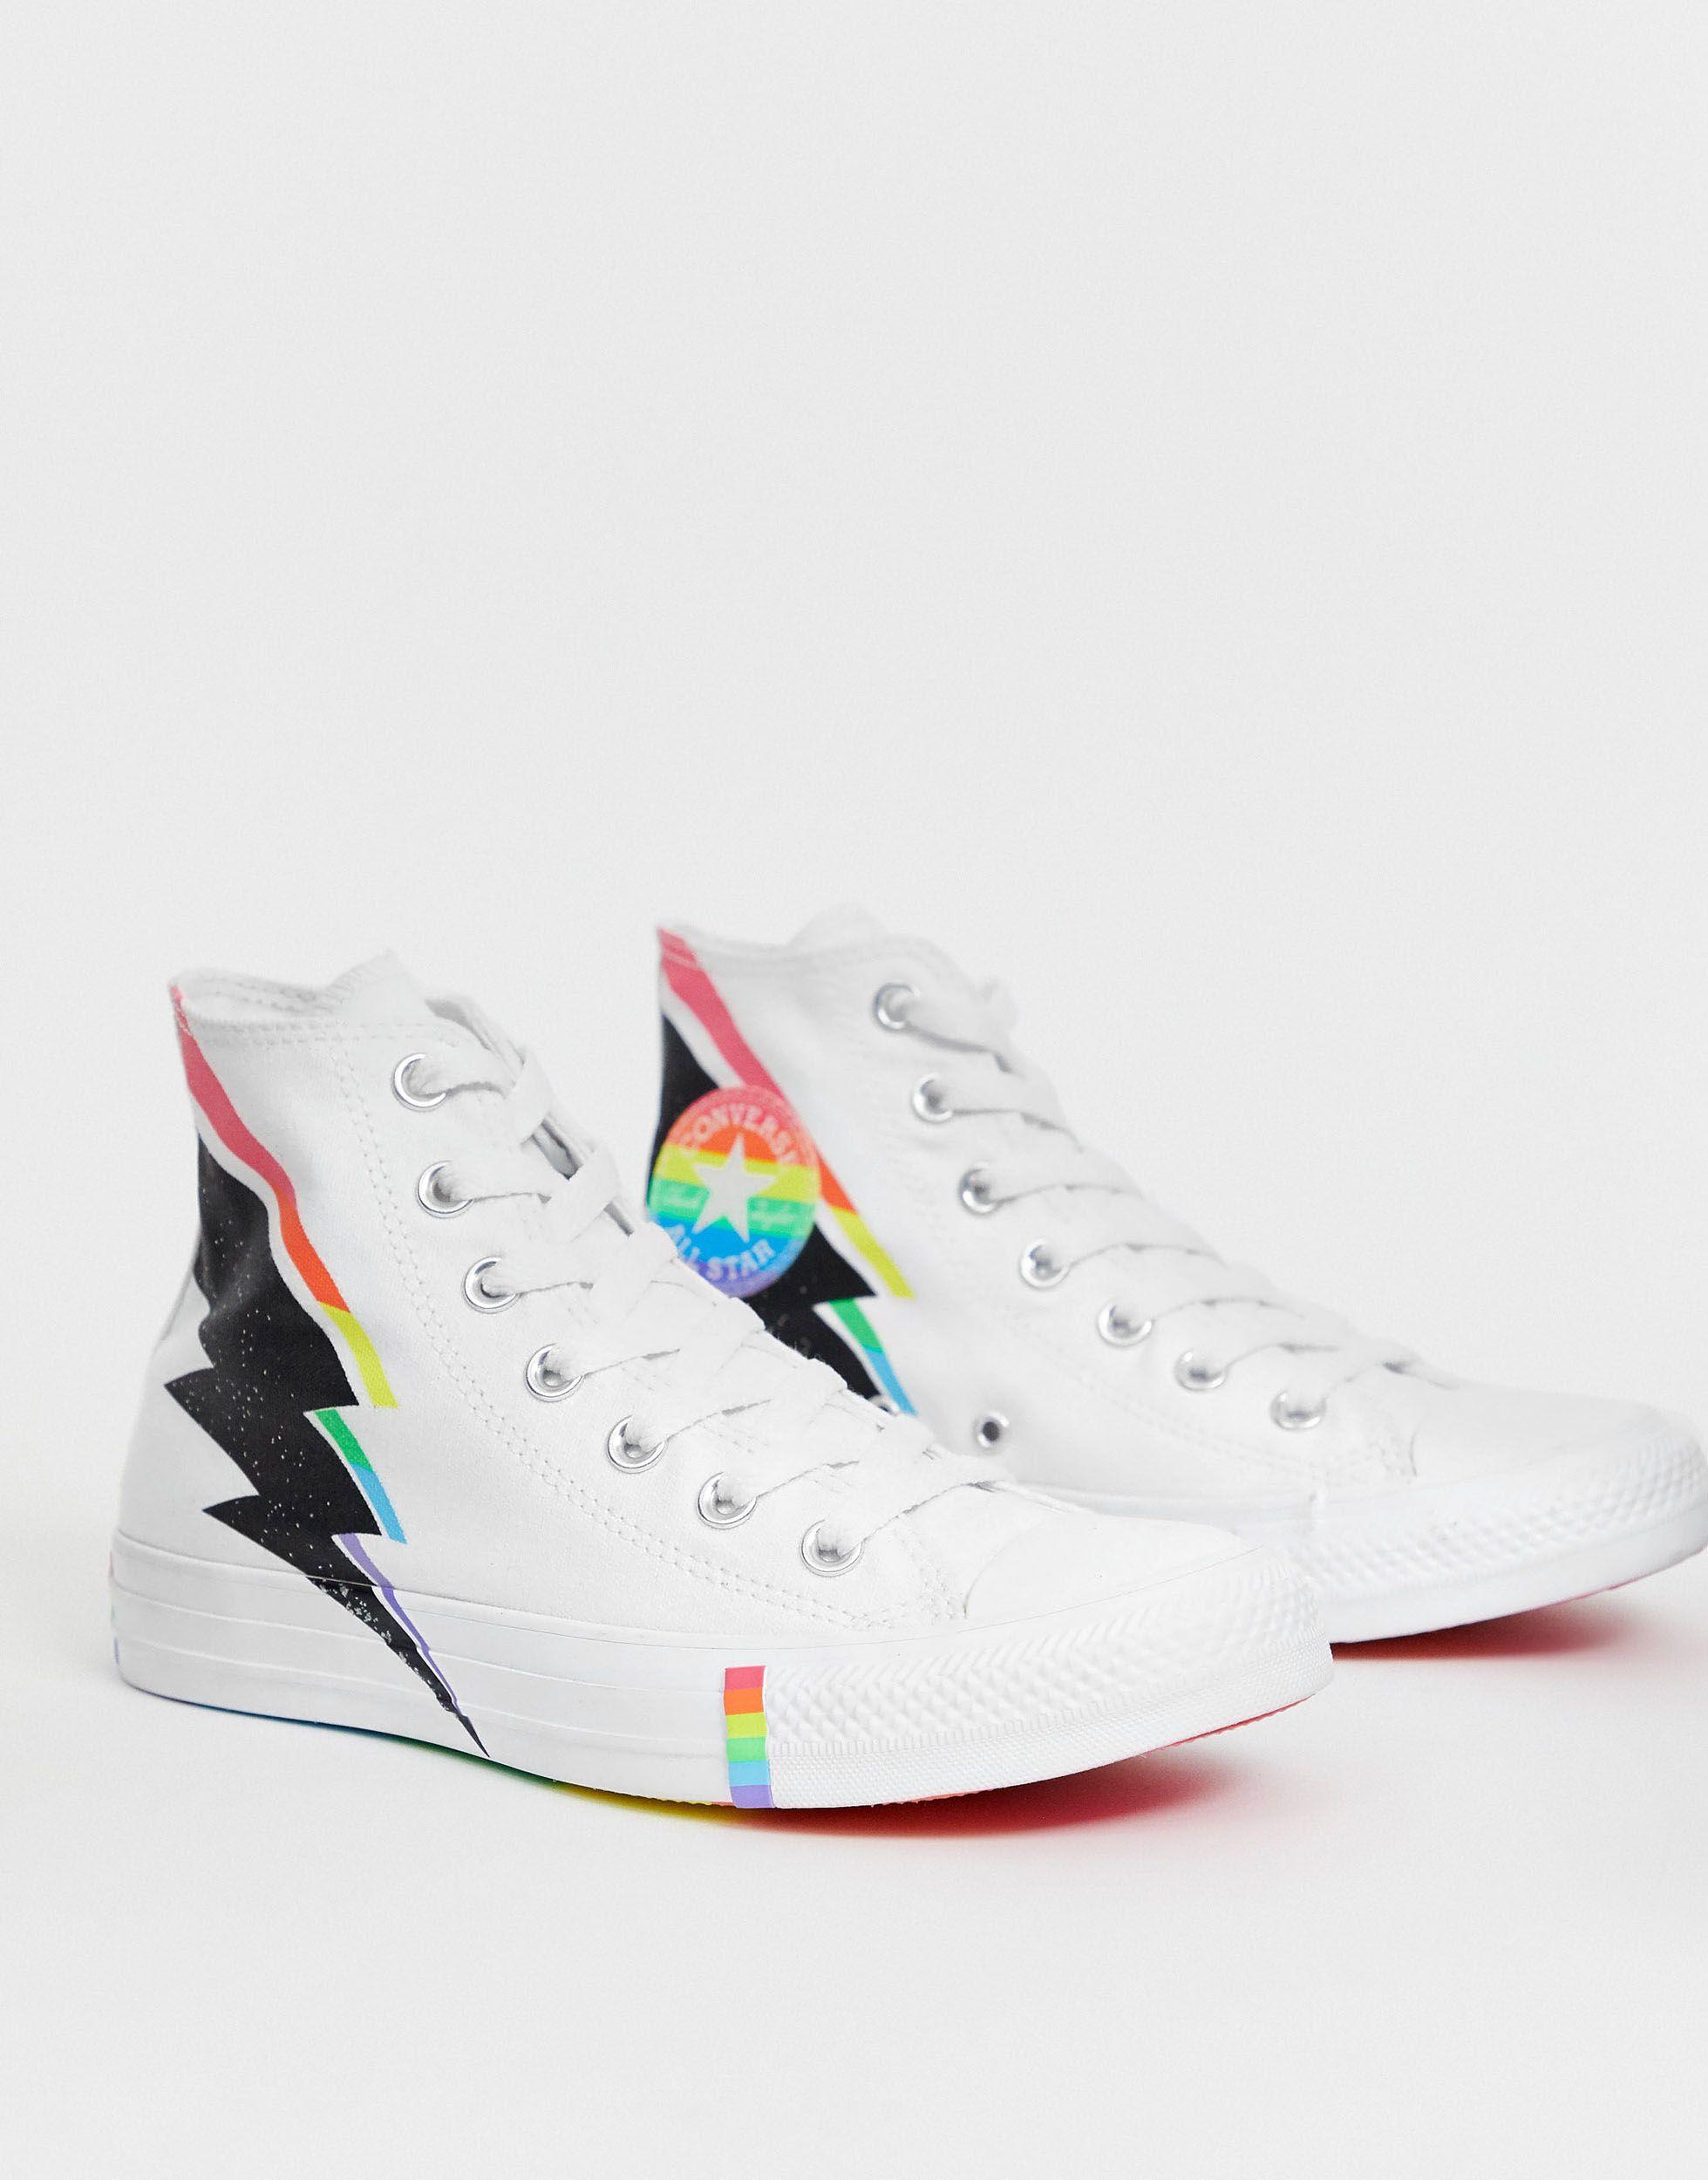 Converse Rubber Pride Chuck Taylor Hi All Star And Rainbow Lightning Bolt  Trainers in White - Lyst